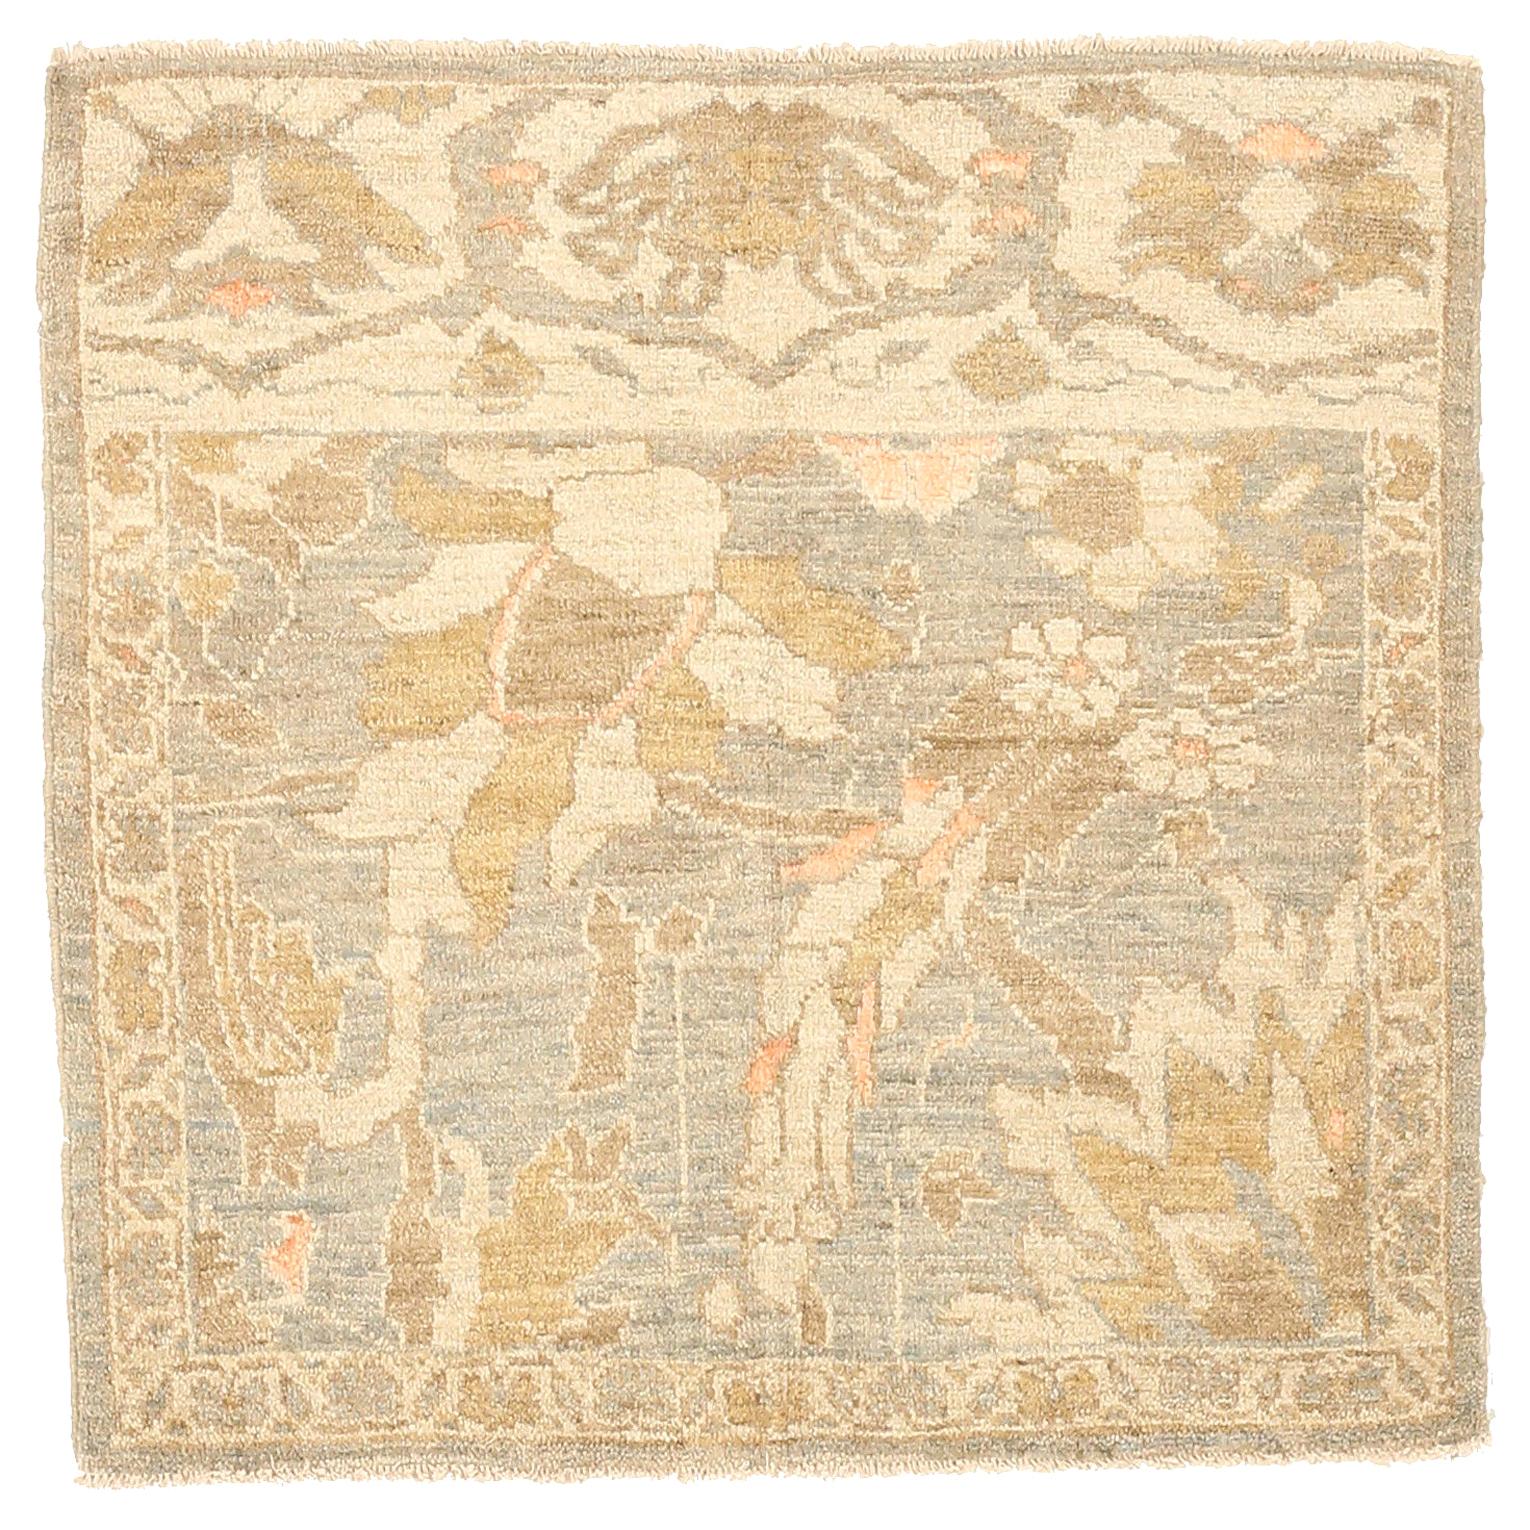 Modern Persian Sultanabad Rug with Gray and Brown Floral Details